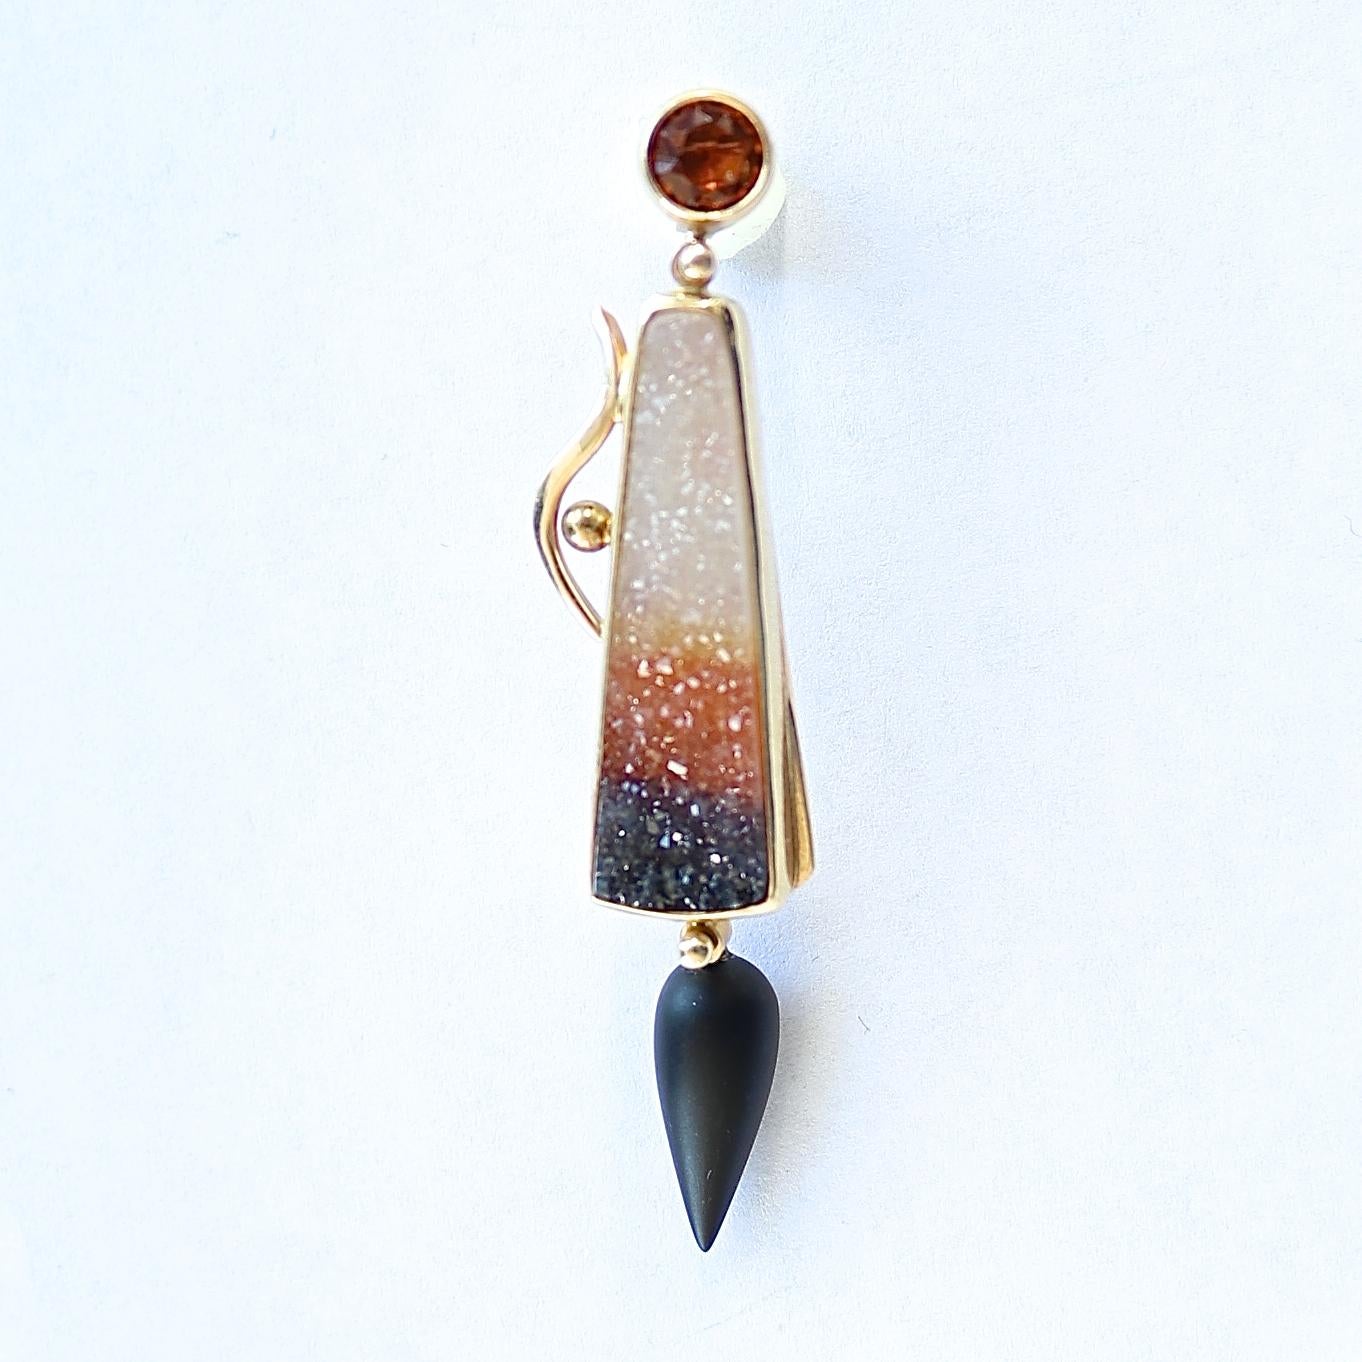 Unique ingenuity with avante-garde style. This is not your typical jewelry store. Featuring colorful citrine, quartz and jet that playfully dangle from the ear. Crafted in 18k gold. Signed Jewelsmith.